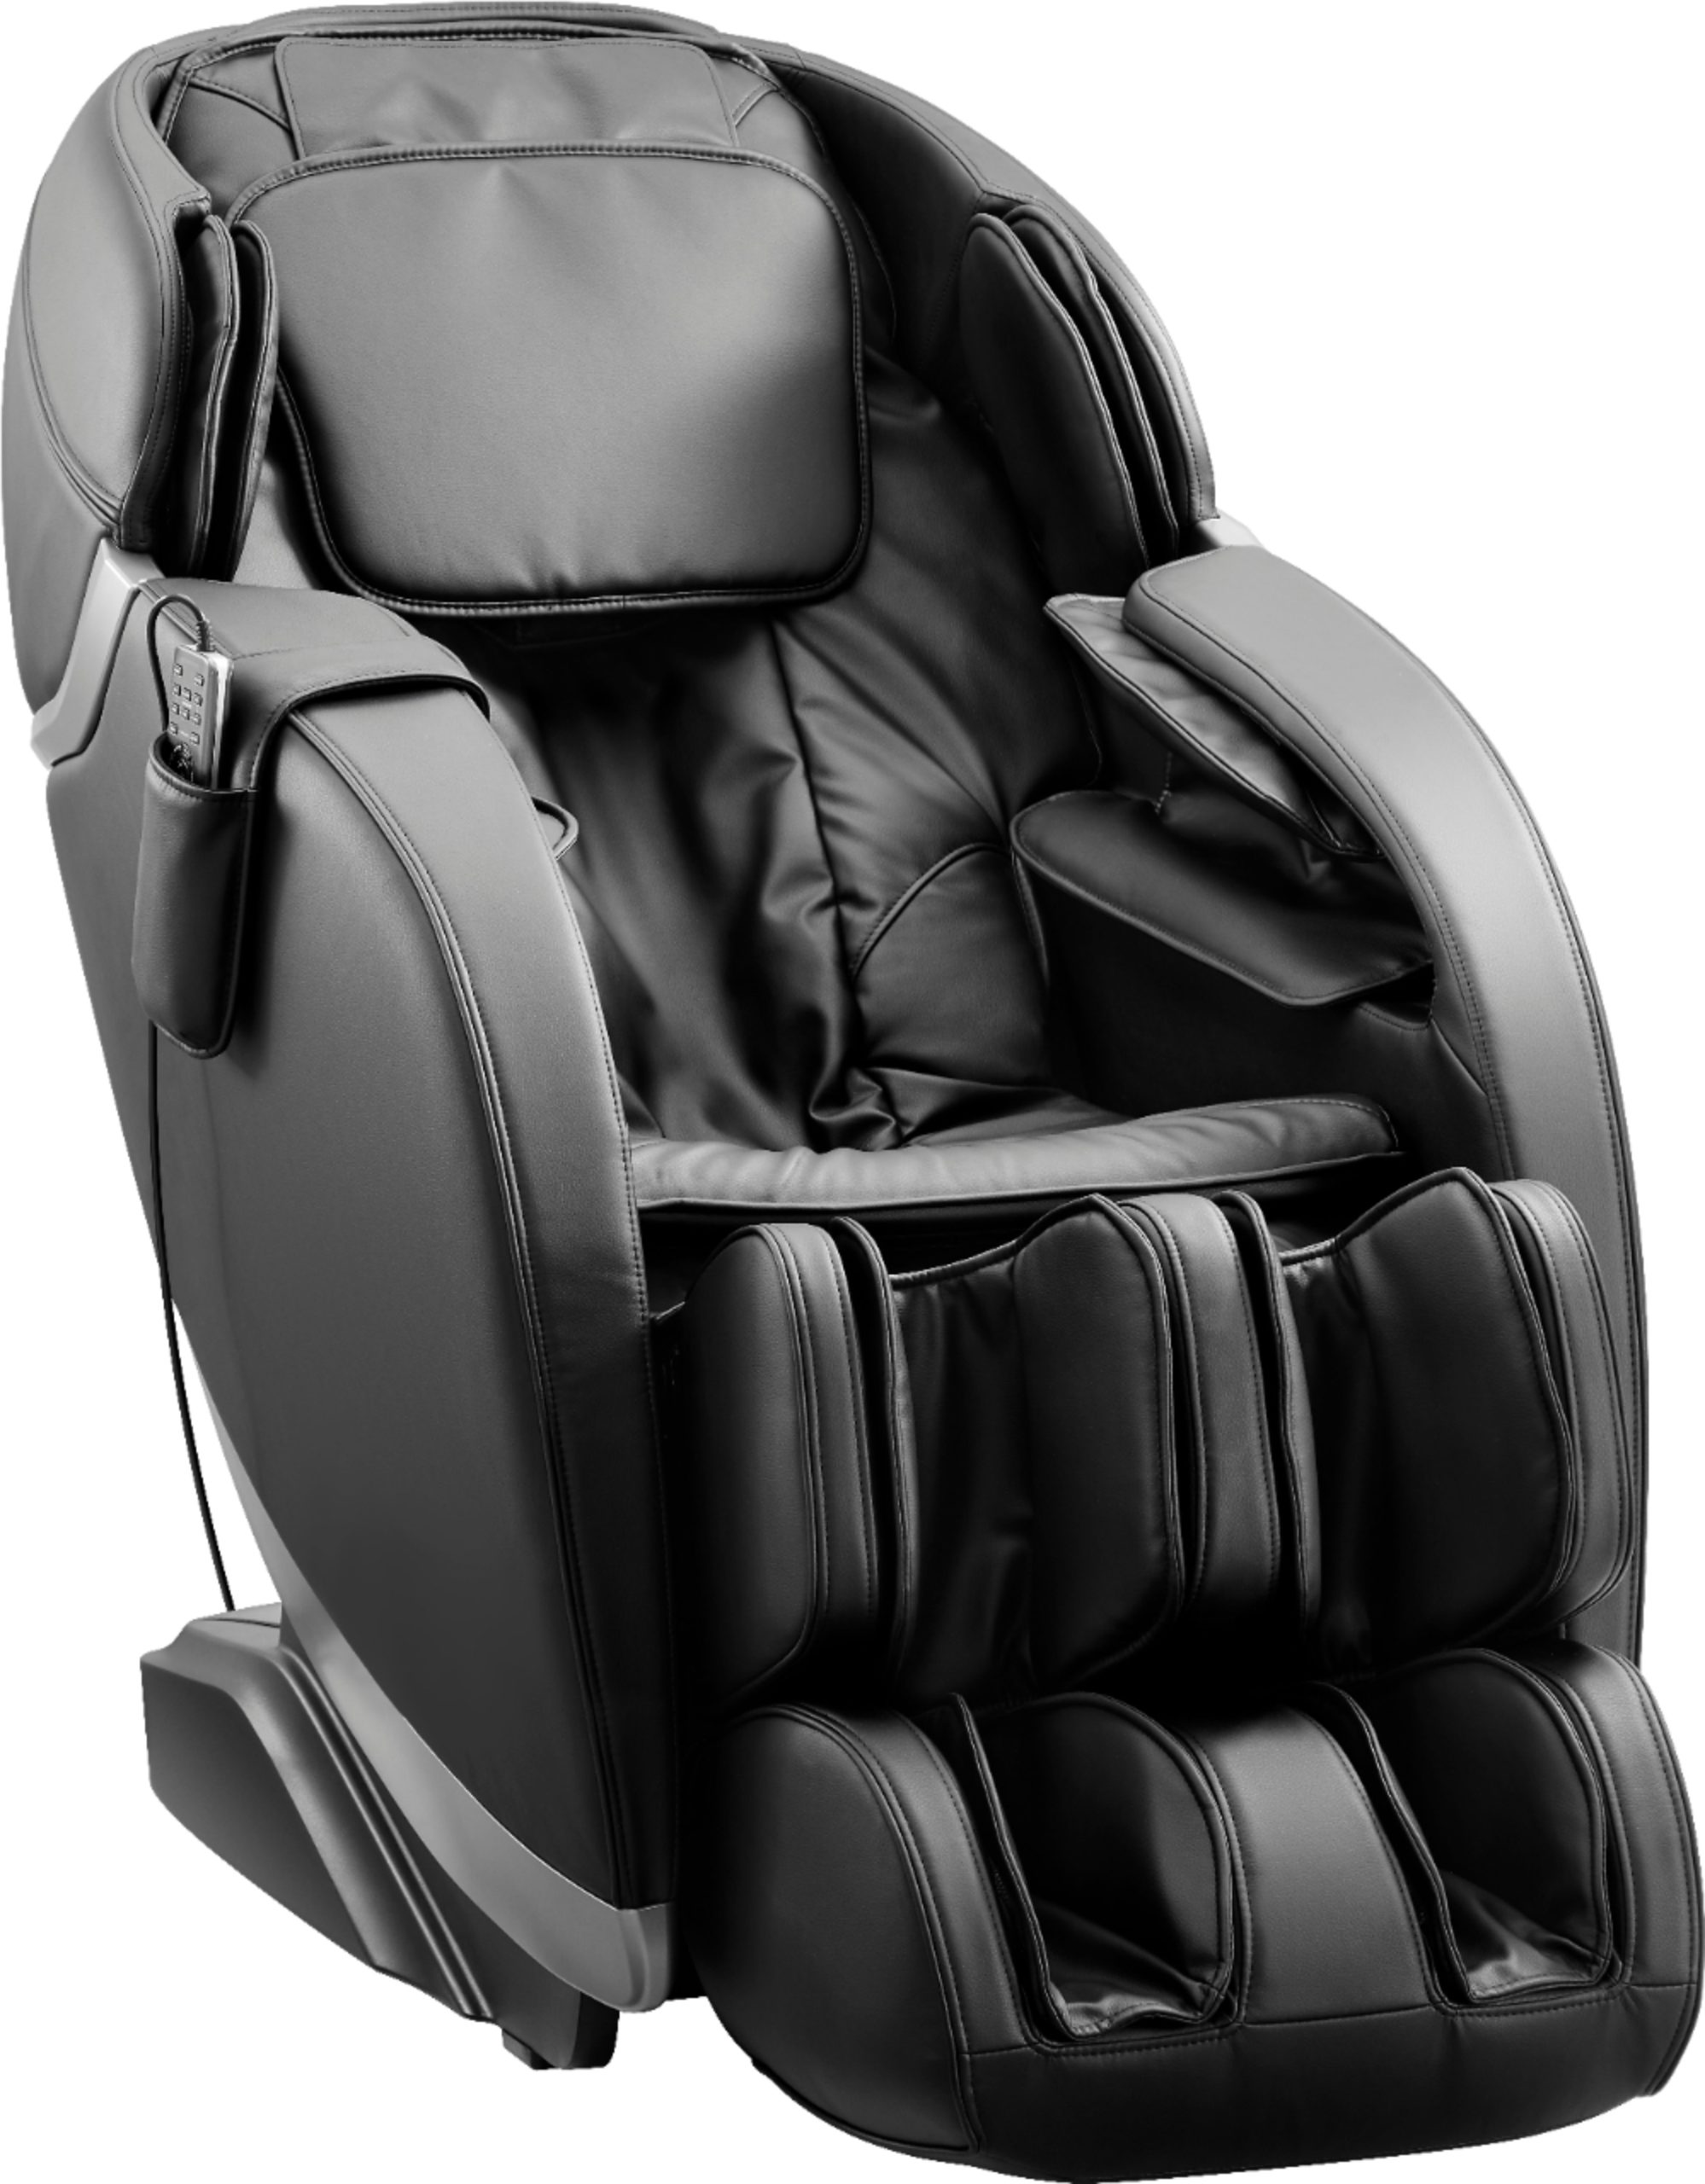 Insignia™ – 2D Zero Gravity Full Body Massage Chair – Black with silver trim – Just $1749.99 at Best Buy